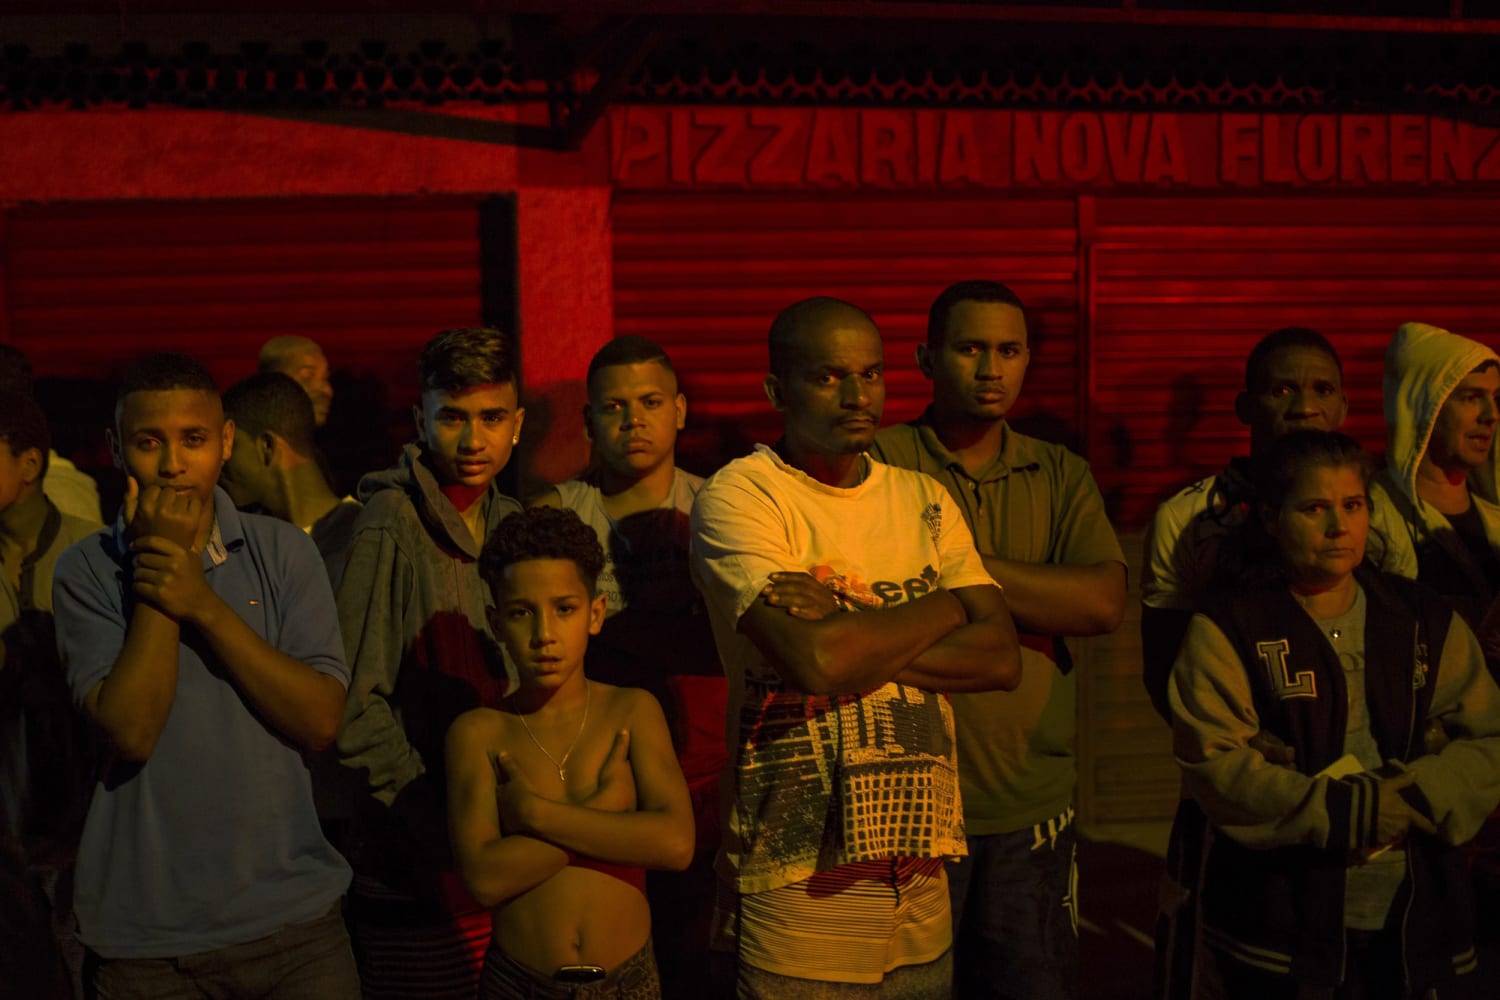 The gangs of Rio, World news